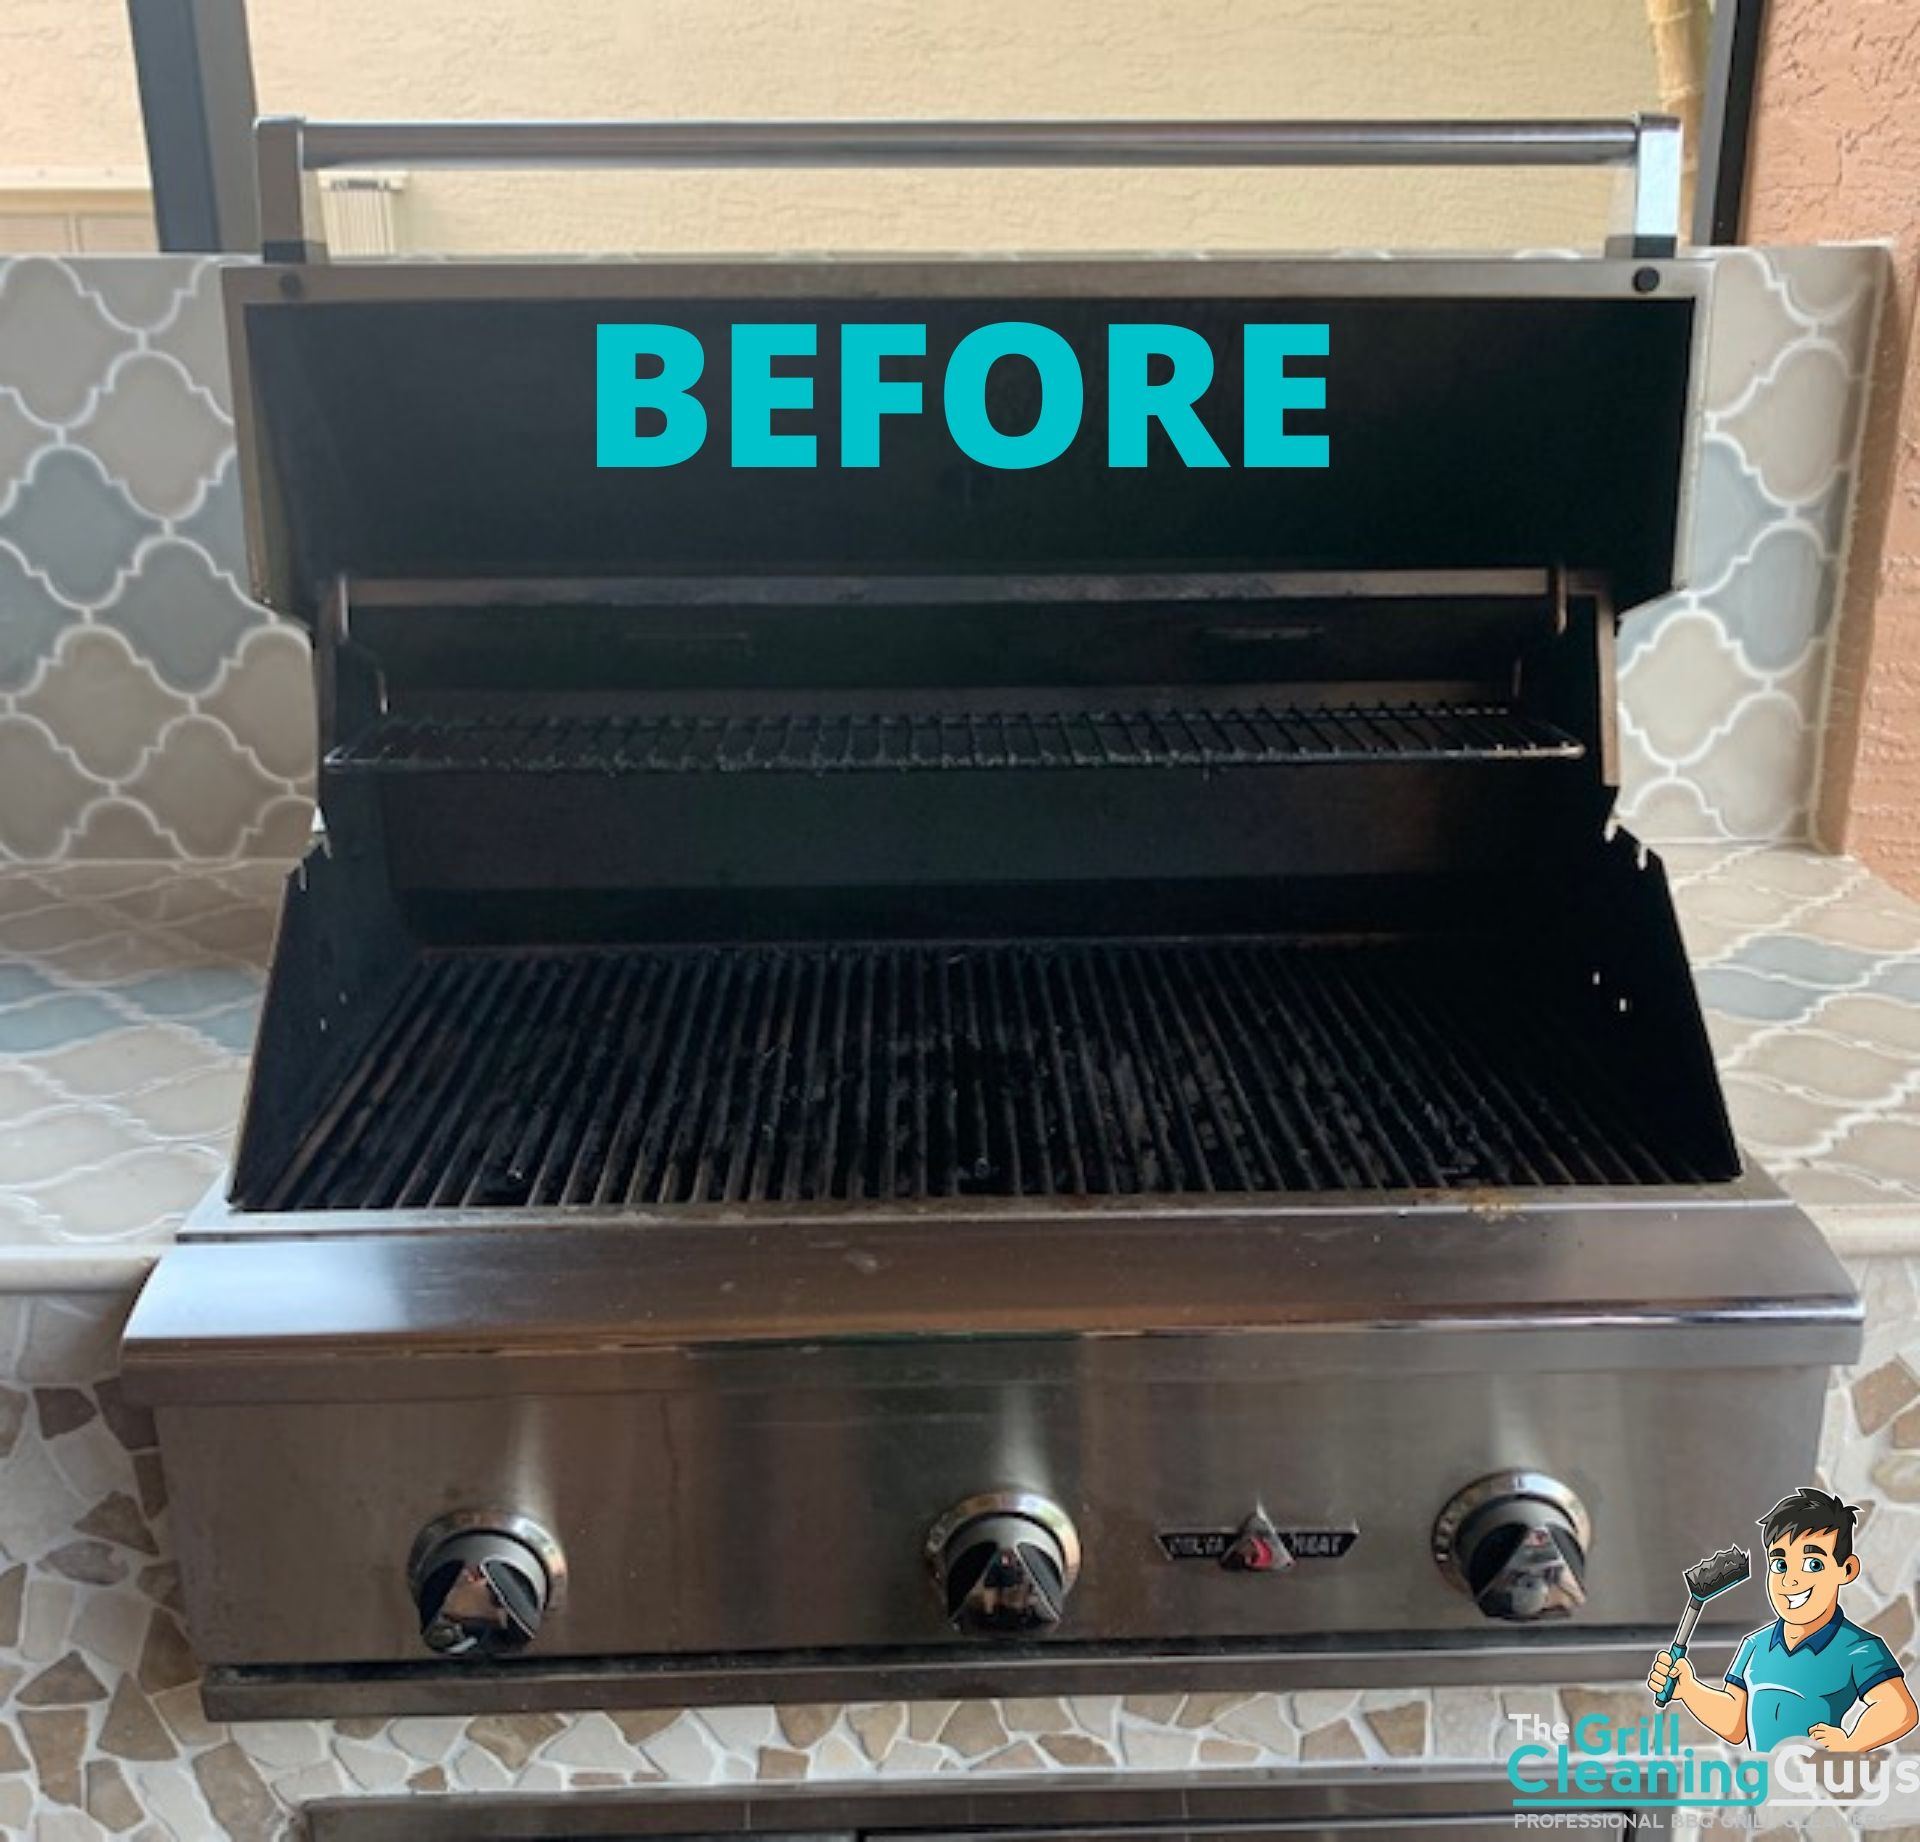 Barbecue Grill Cleaning, The BarbeQue Guy, United States